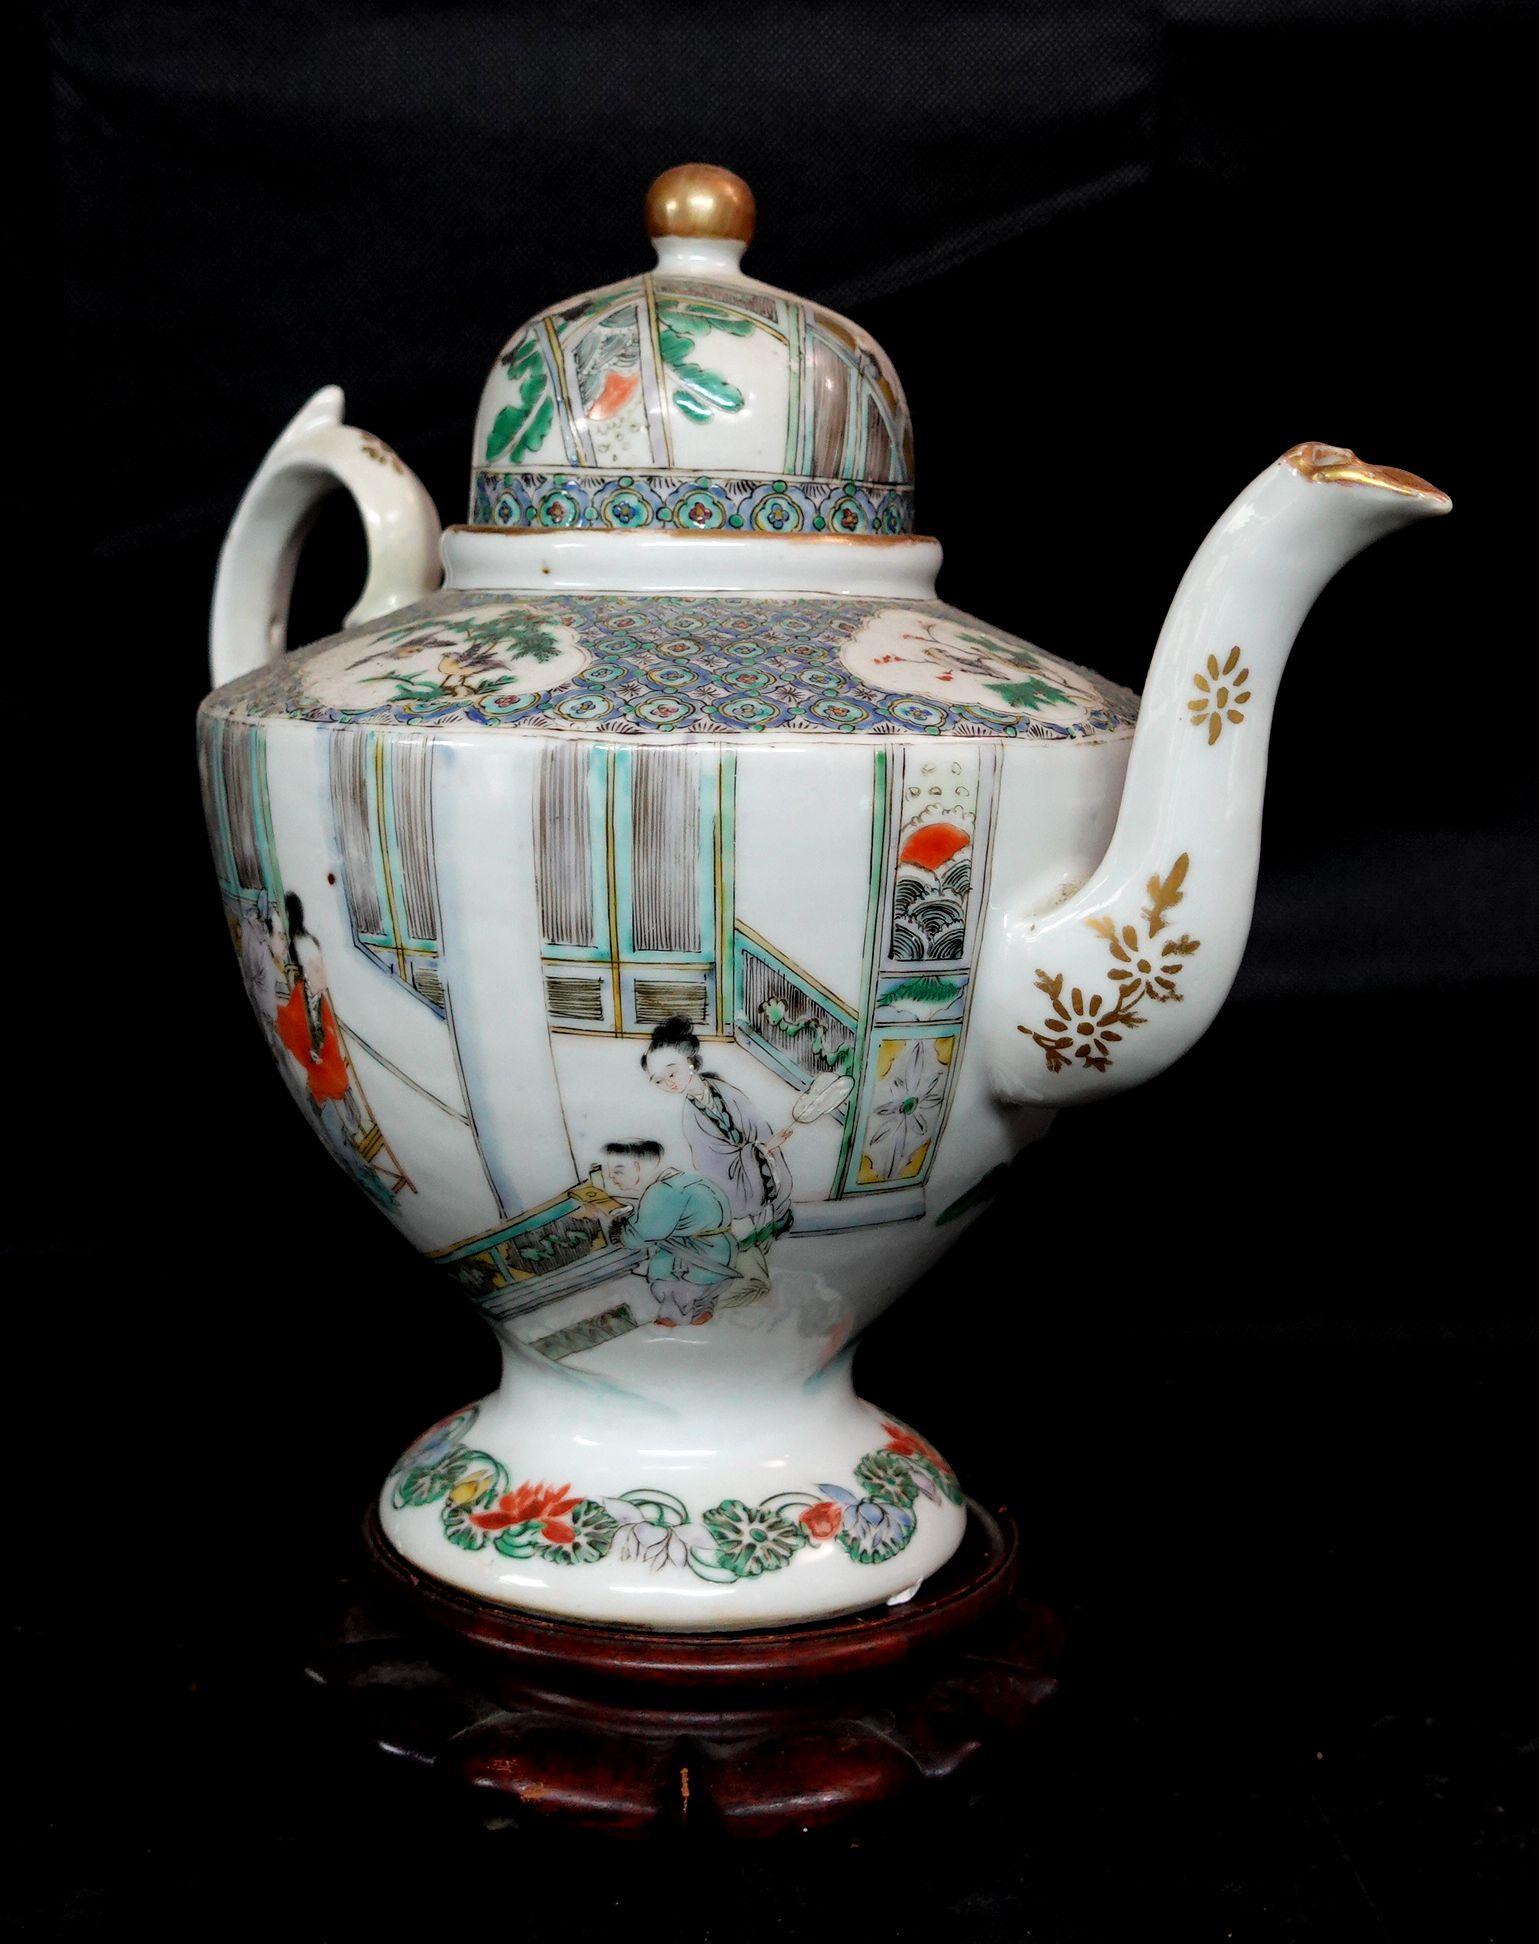 Antique Chinese Famille Rose Porcelain Teapot, early 19th Century For Sale 6